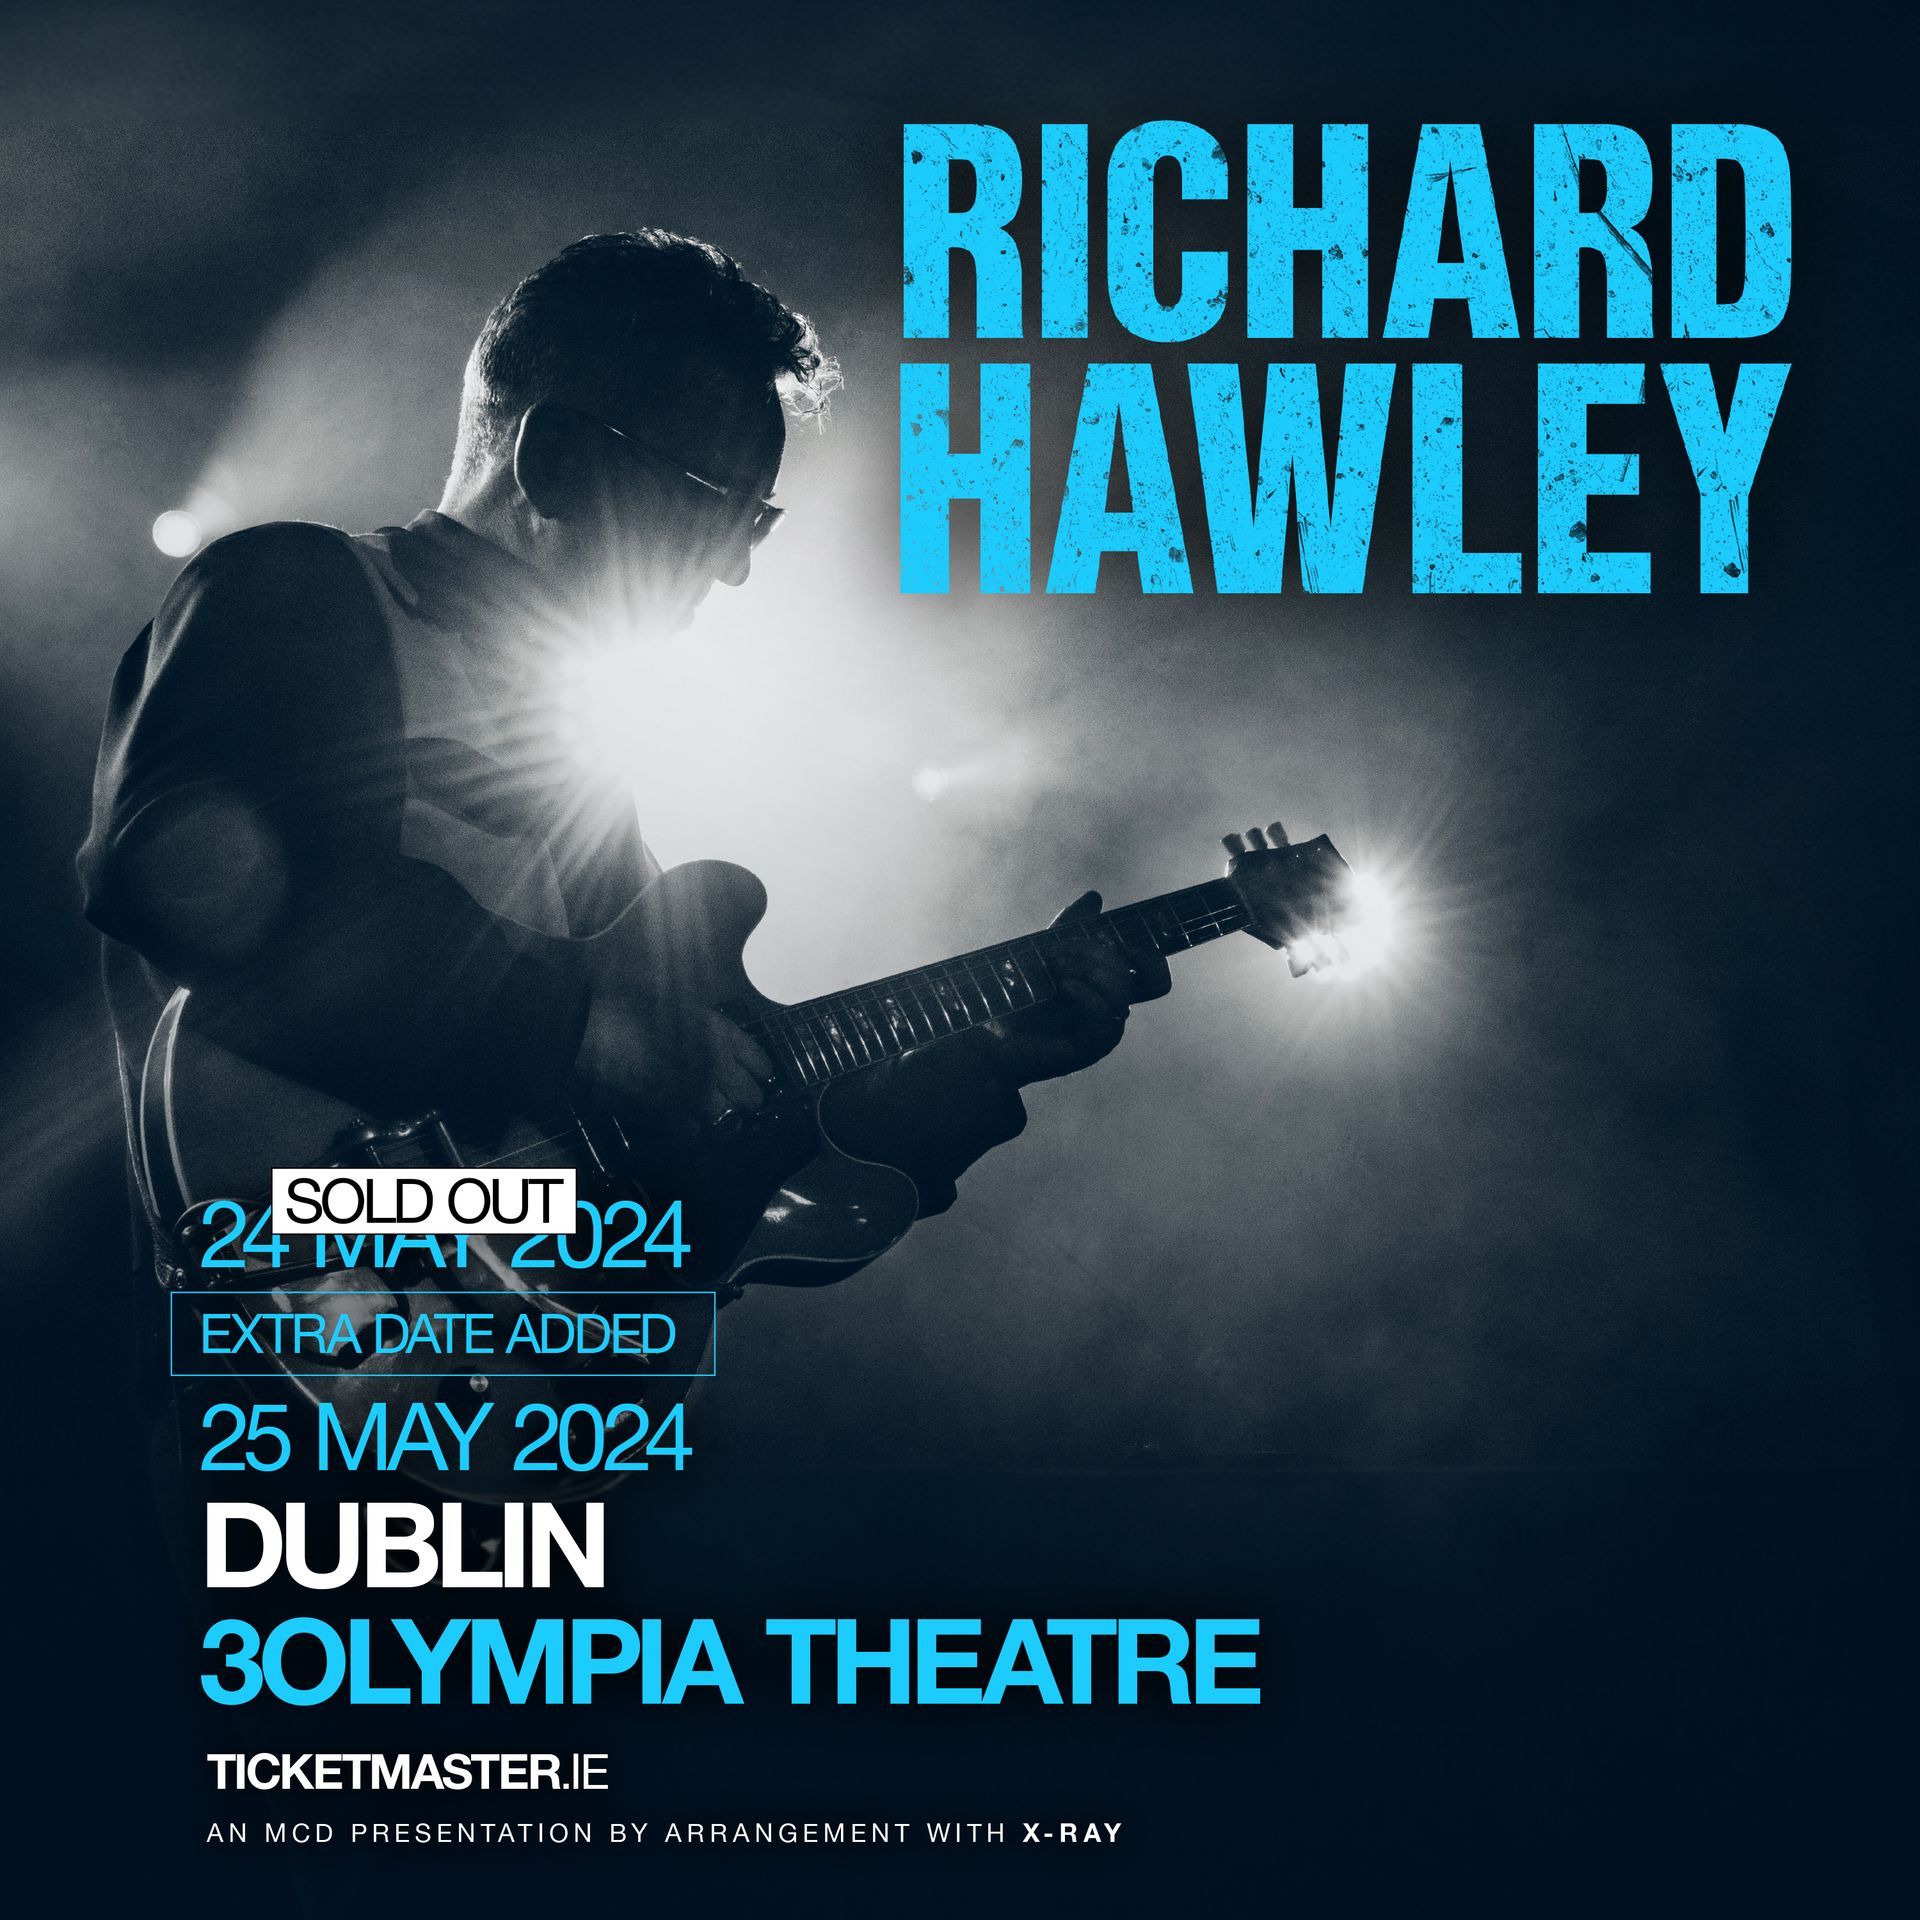 Richard Hawley 
Extra Date Added At 3Olympia
Tickets On Sale Now
